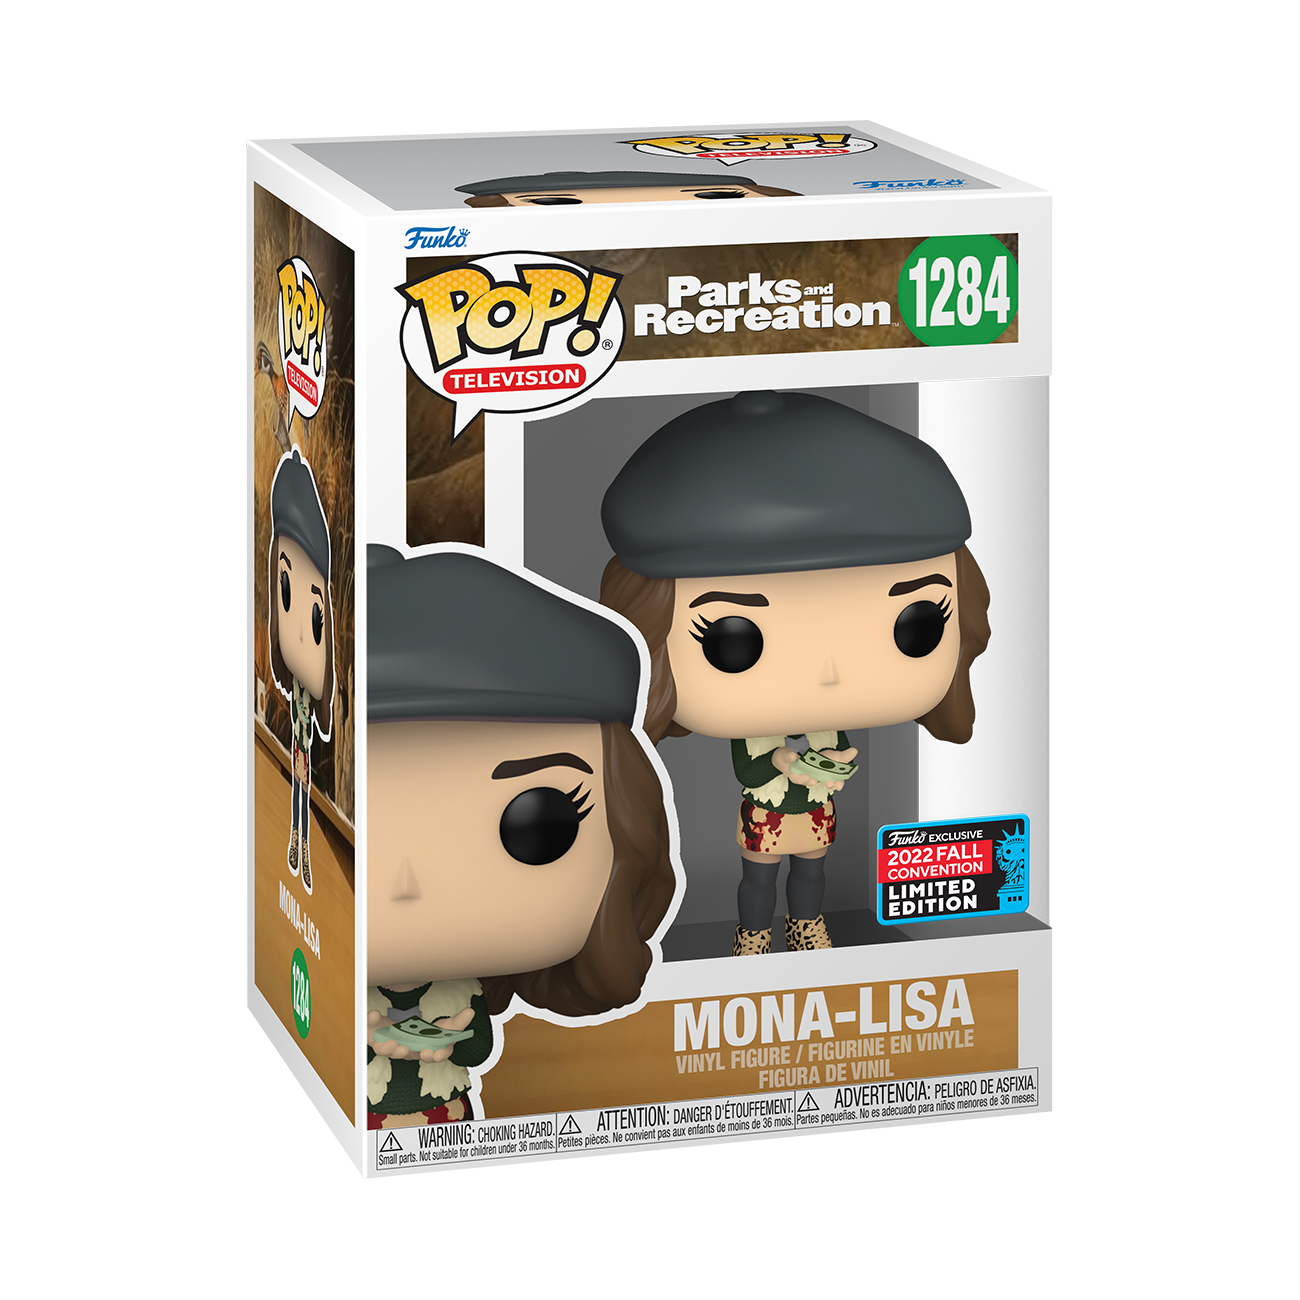 Parks and Recreation - Mona-Lisa NYCC 2022 Fall Convention Exclusive Pop! Vinyl